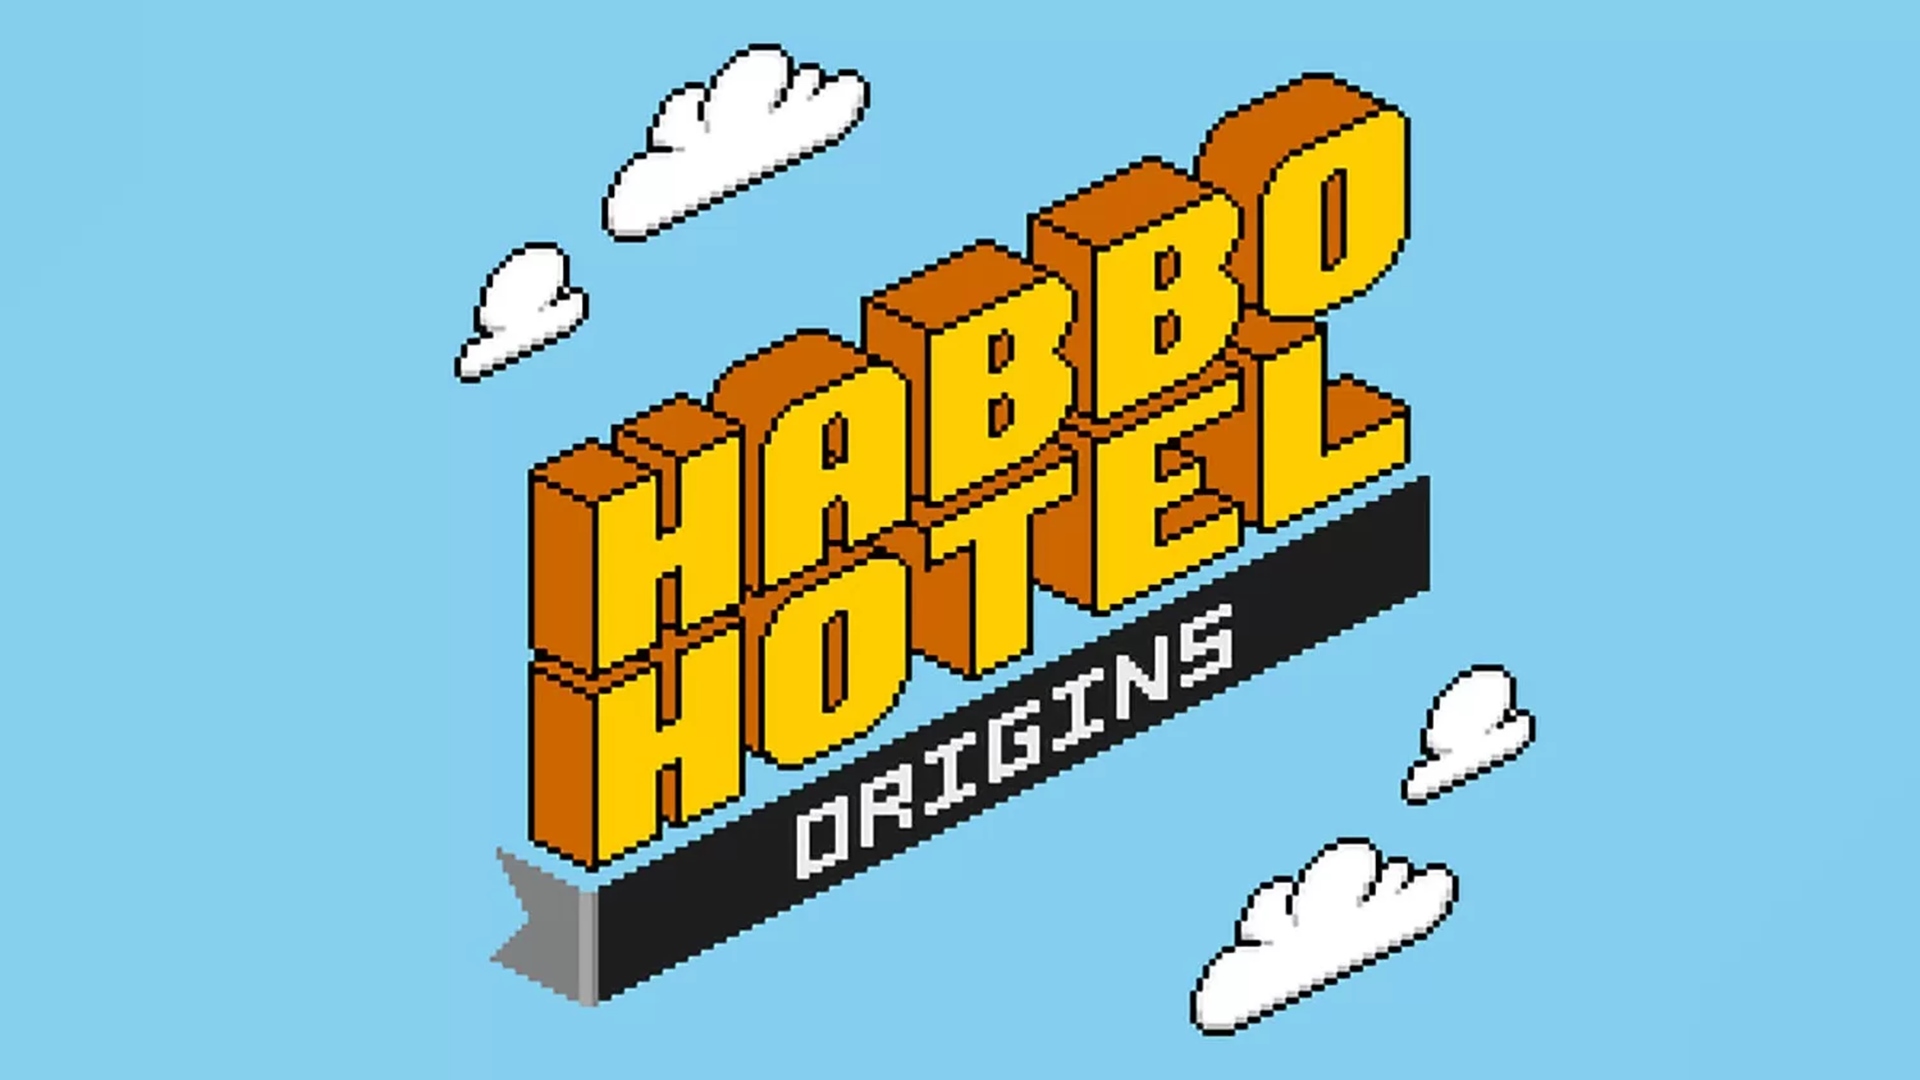 Habbo Hotel: Origins is now available for free to play.